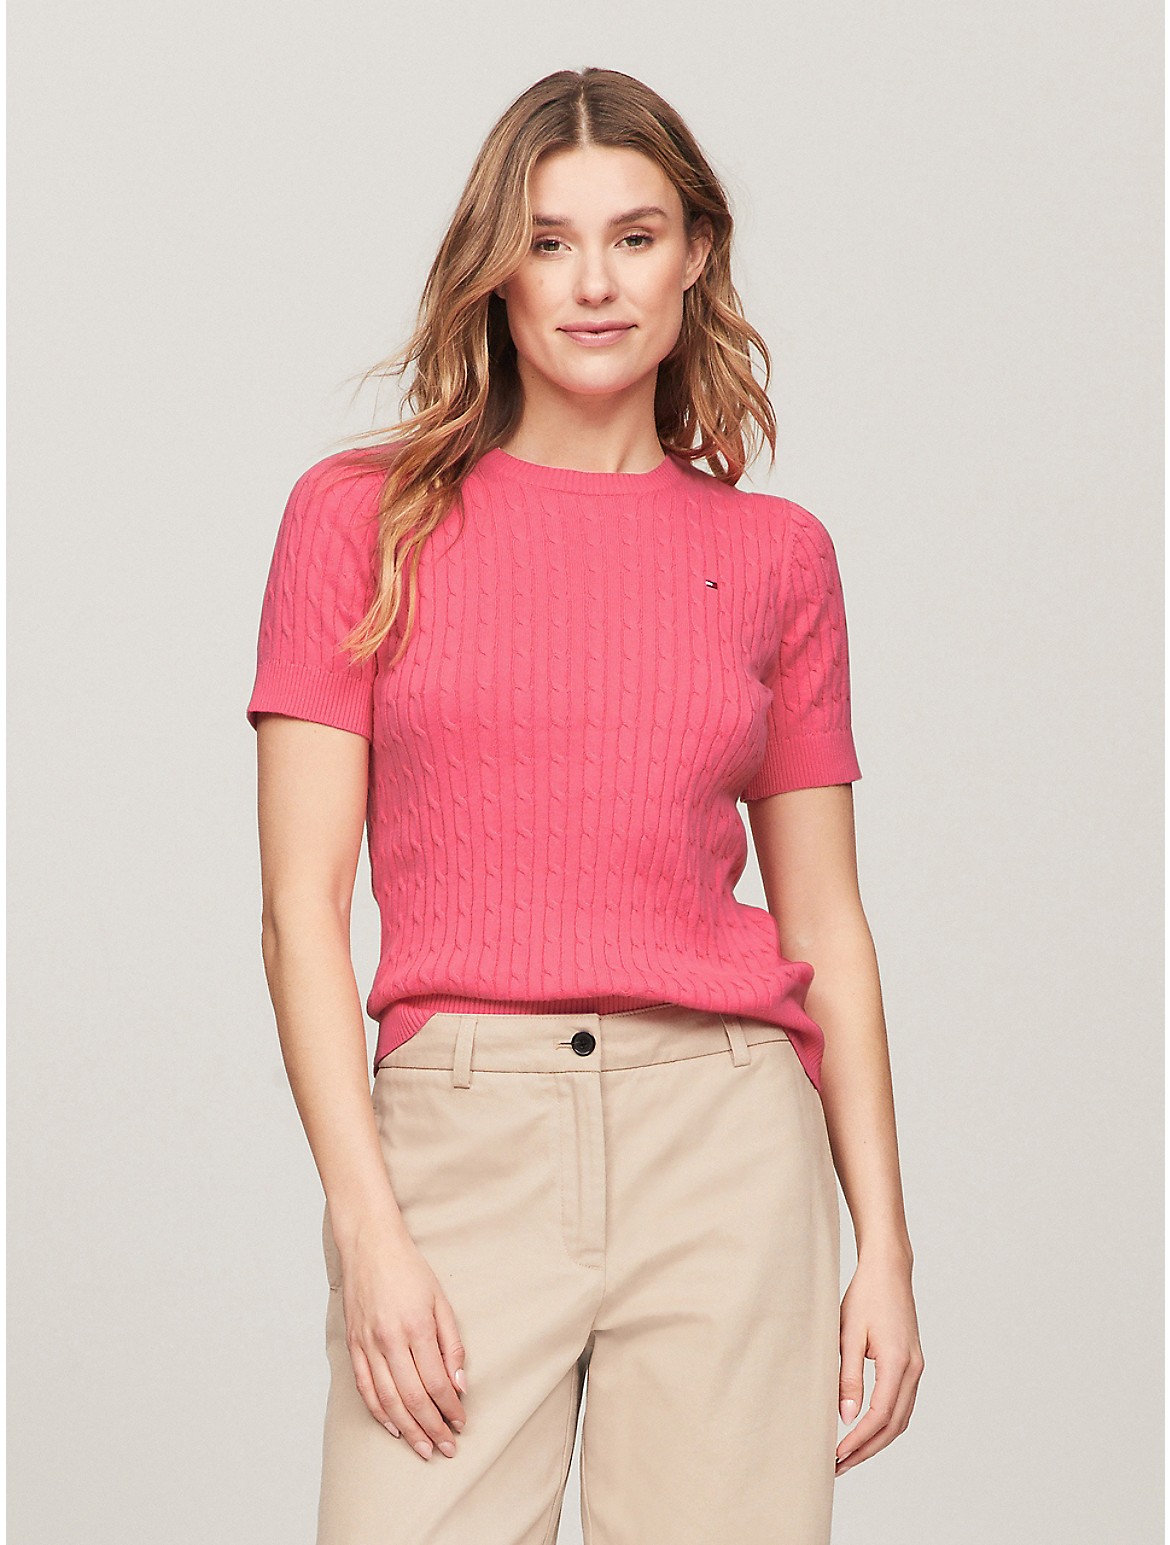 Tommy Hilfiger Women's Short-Sleeve Cable Sweater - Pink - S